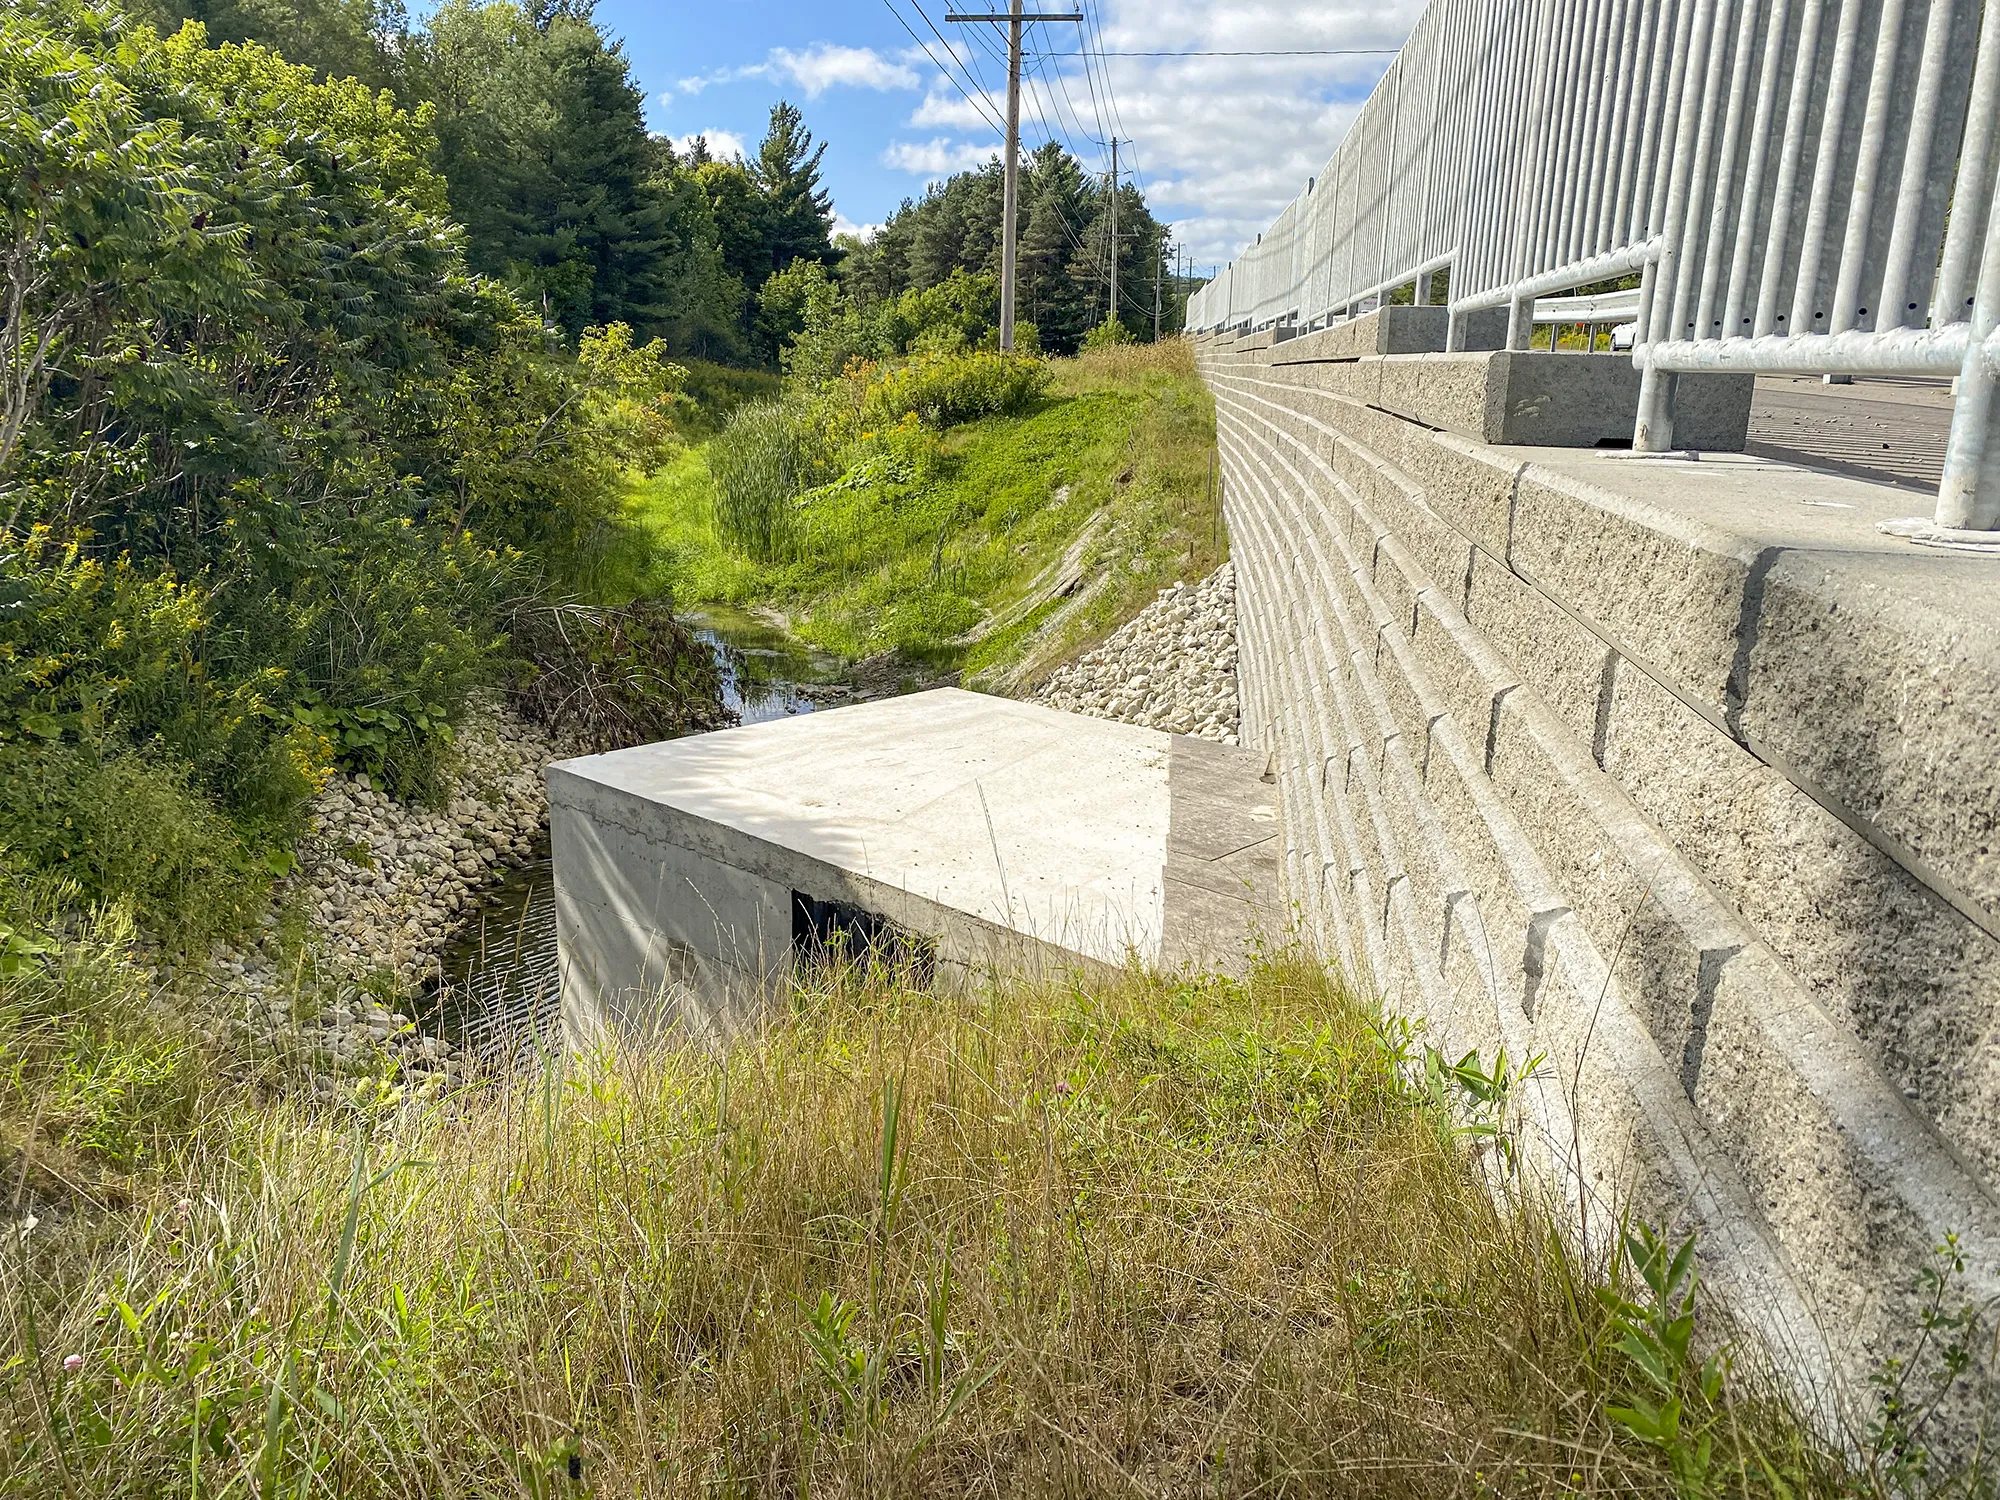 County Road 93 Culvert and retaining wall